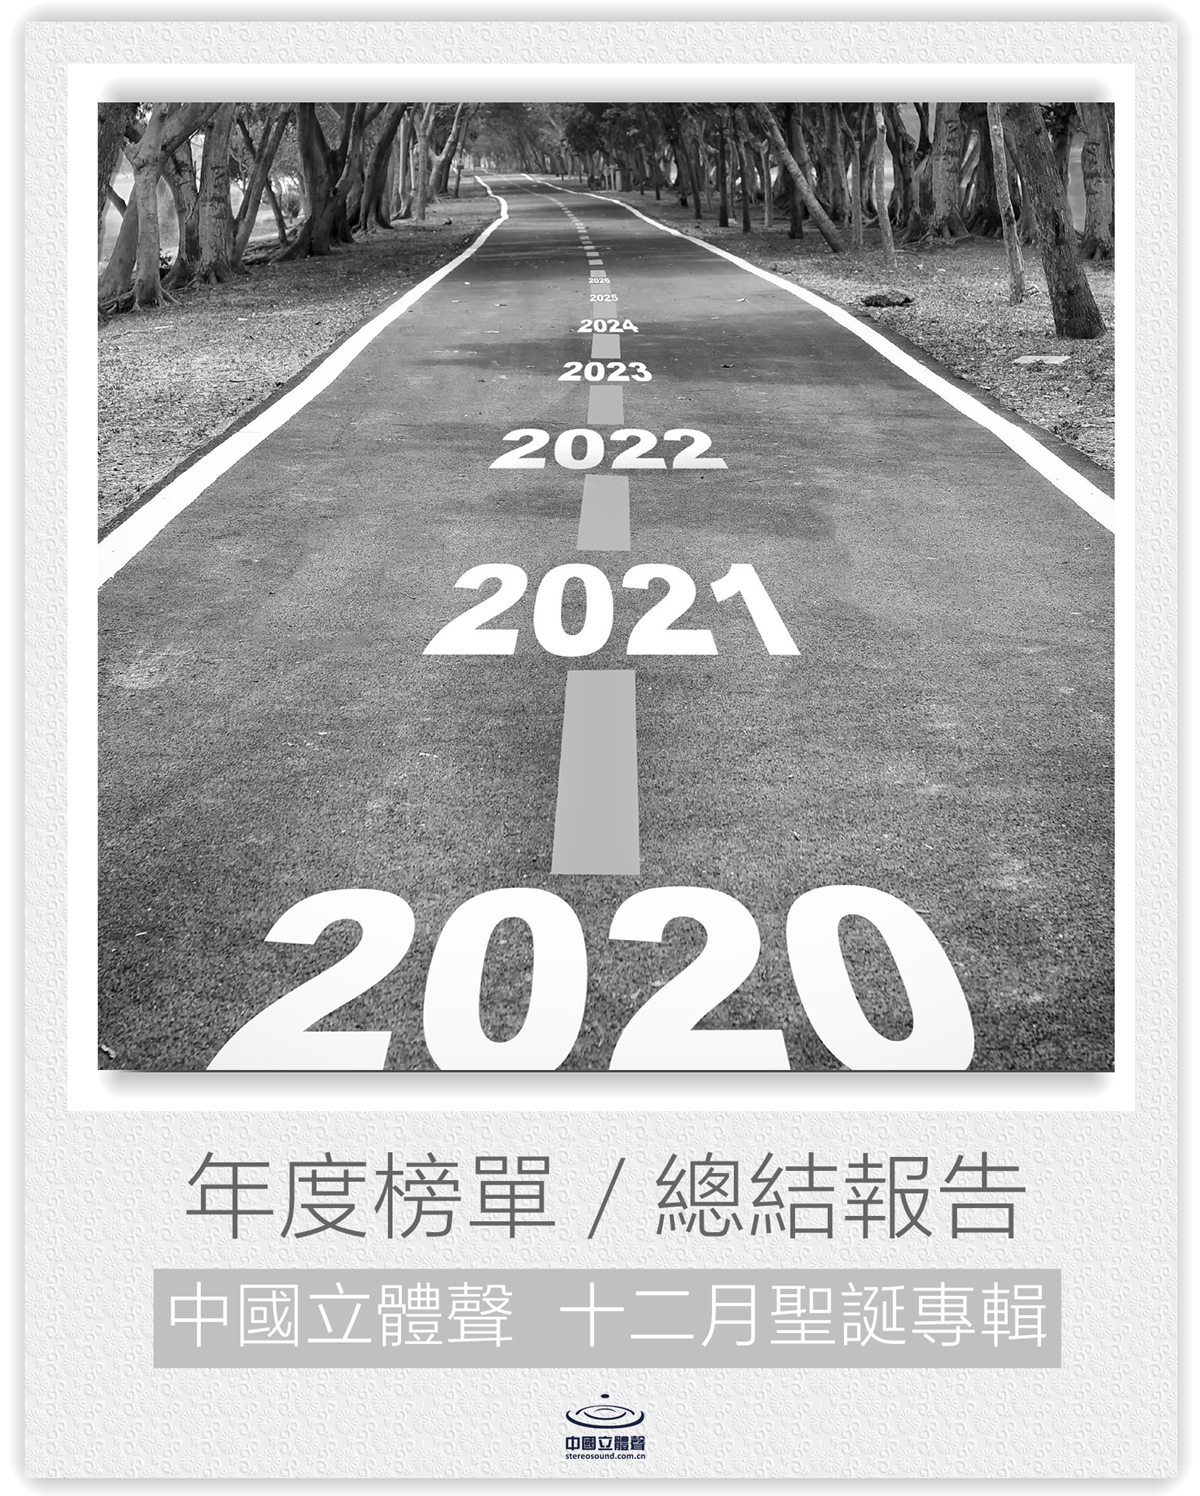 Annual-Report-Cover-FY-2019-2020-ds - small.png